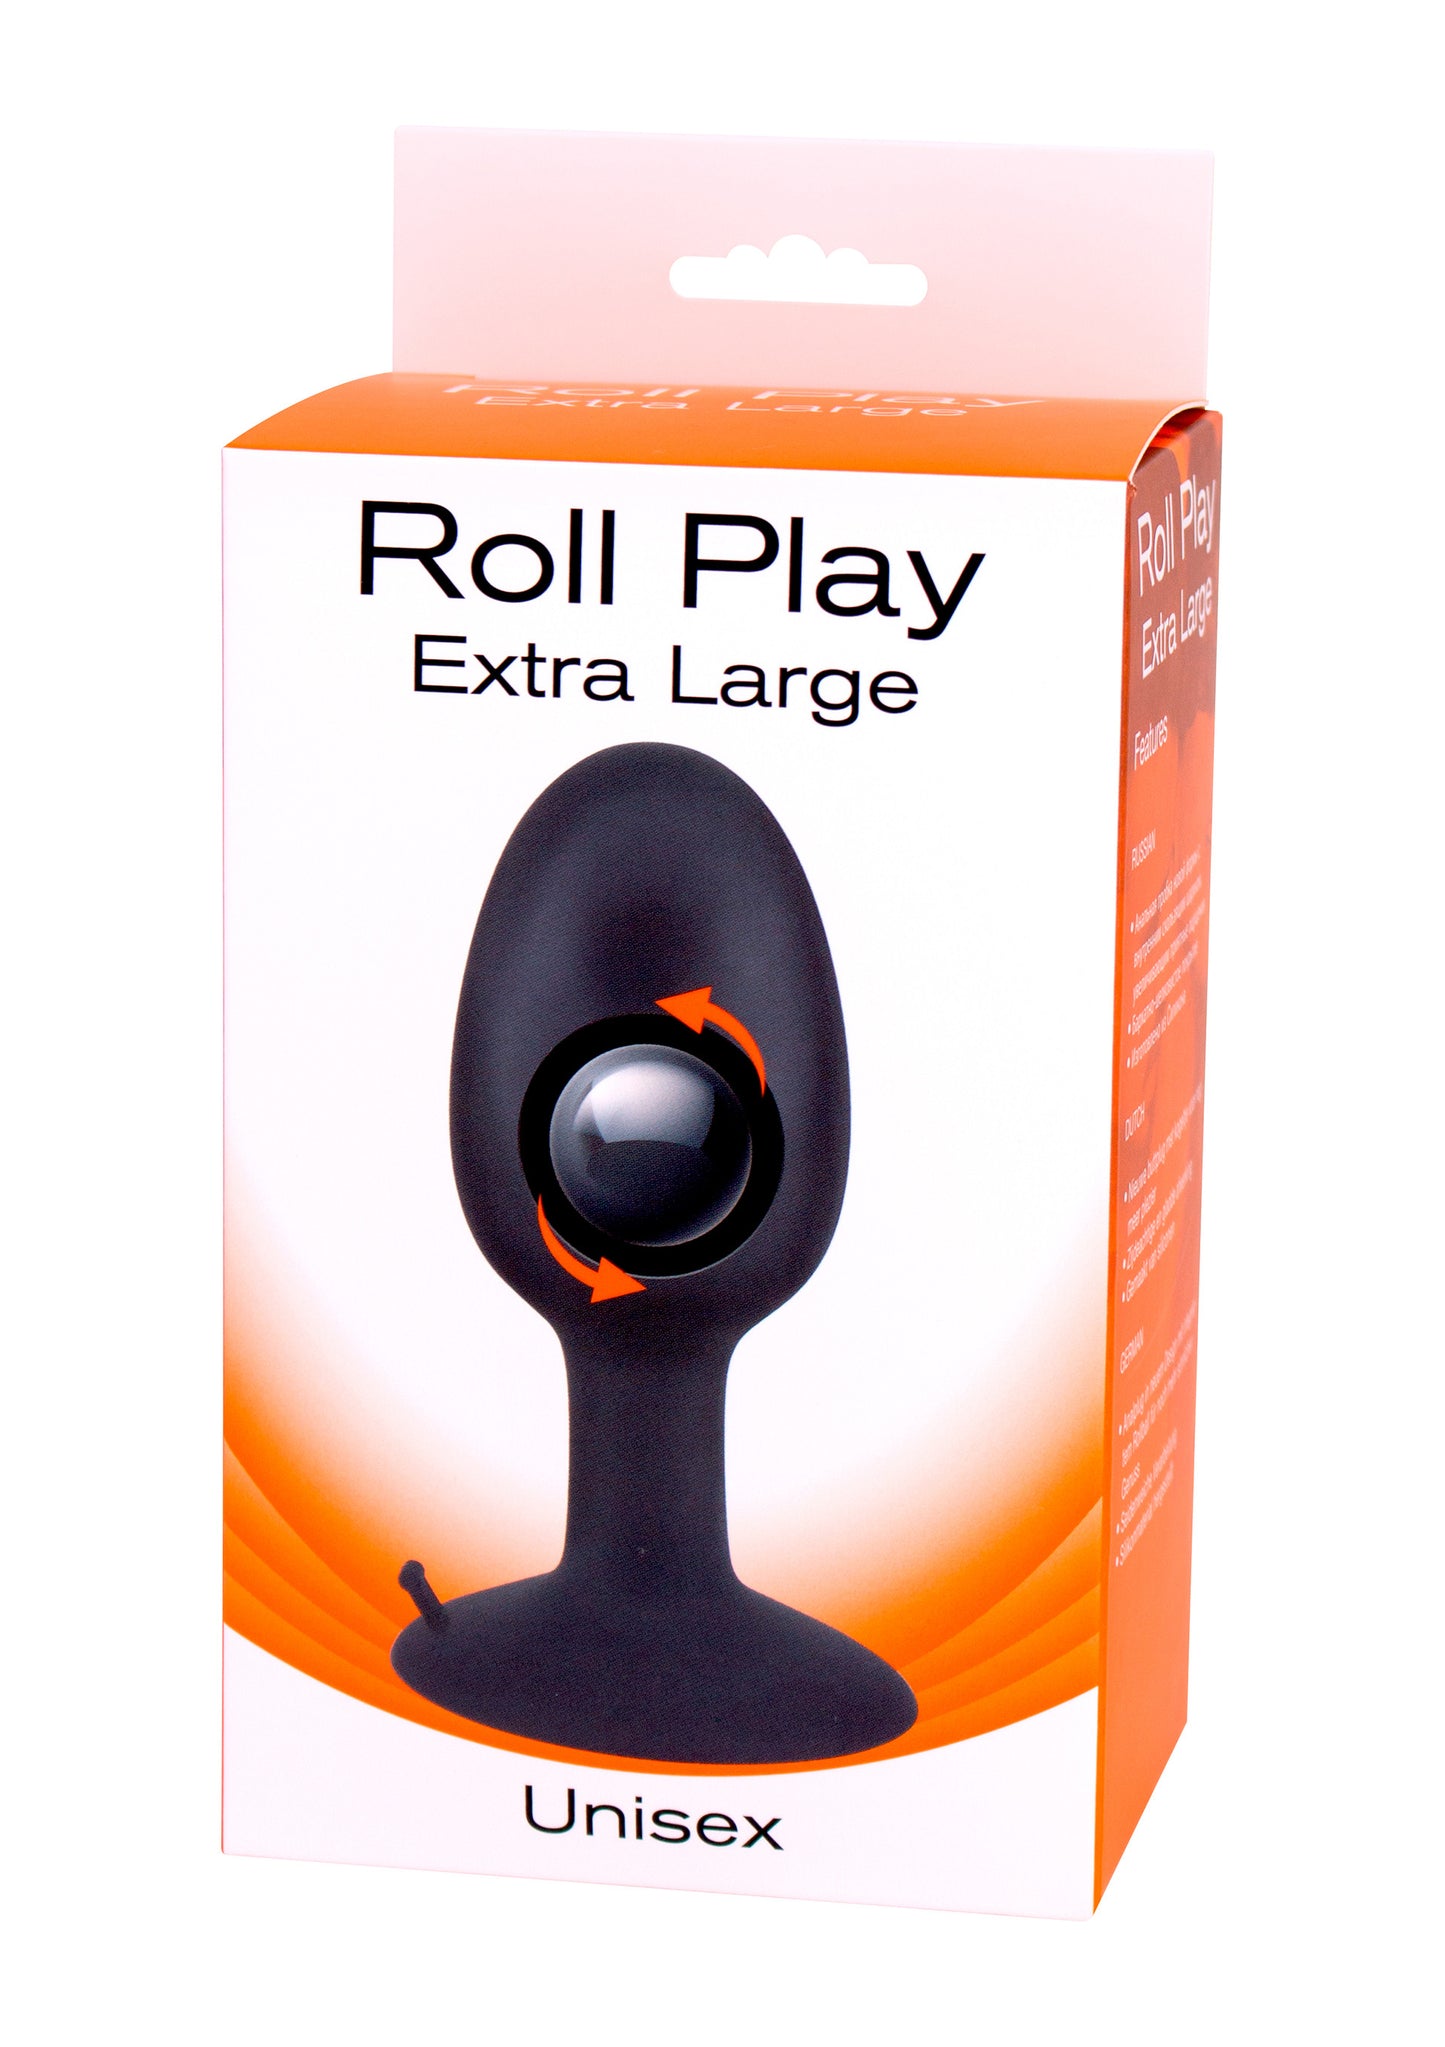 Plug anale con ventosa in silicone Roll Play Extra Large